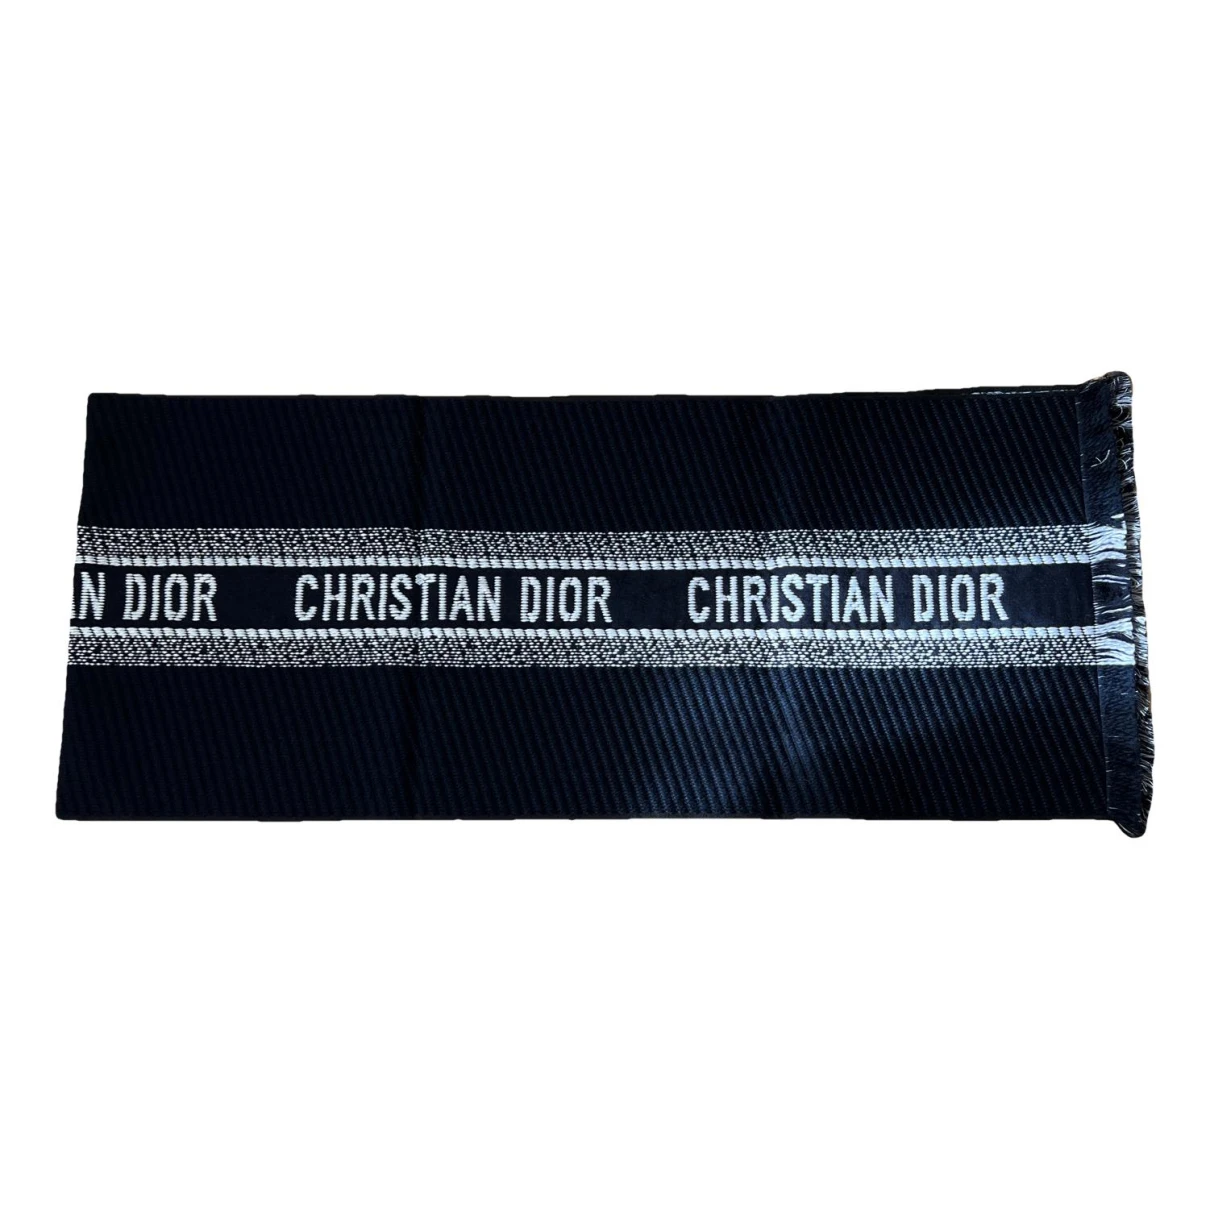 Pre-owned Dior Wool Scarf & Pocket Square In Navy